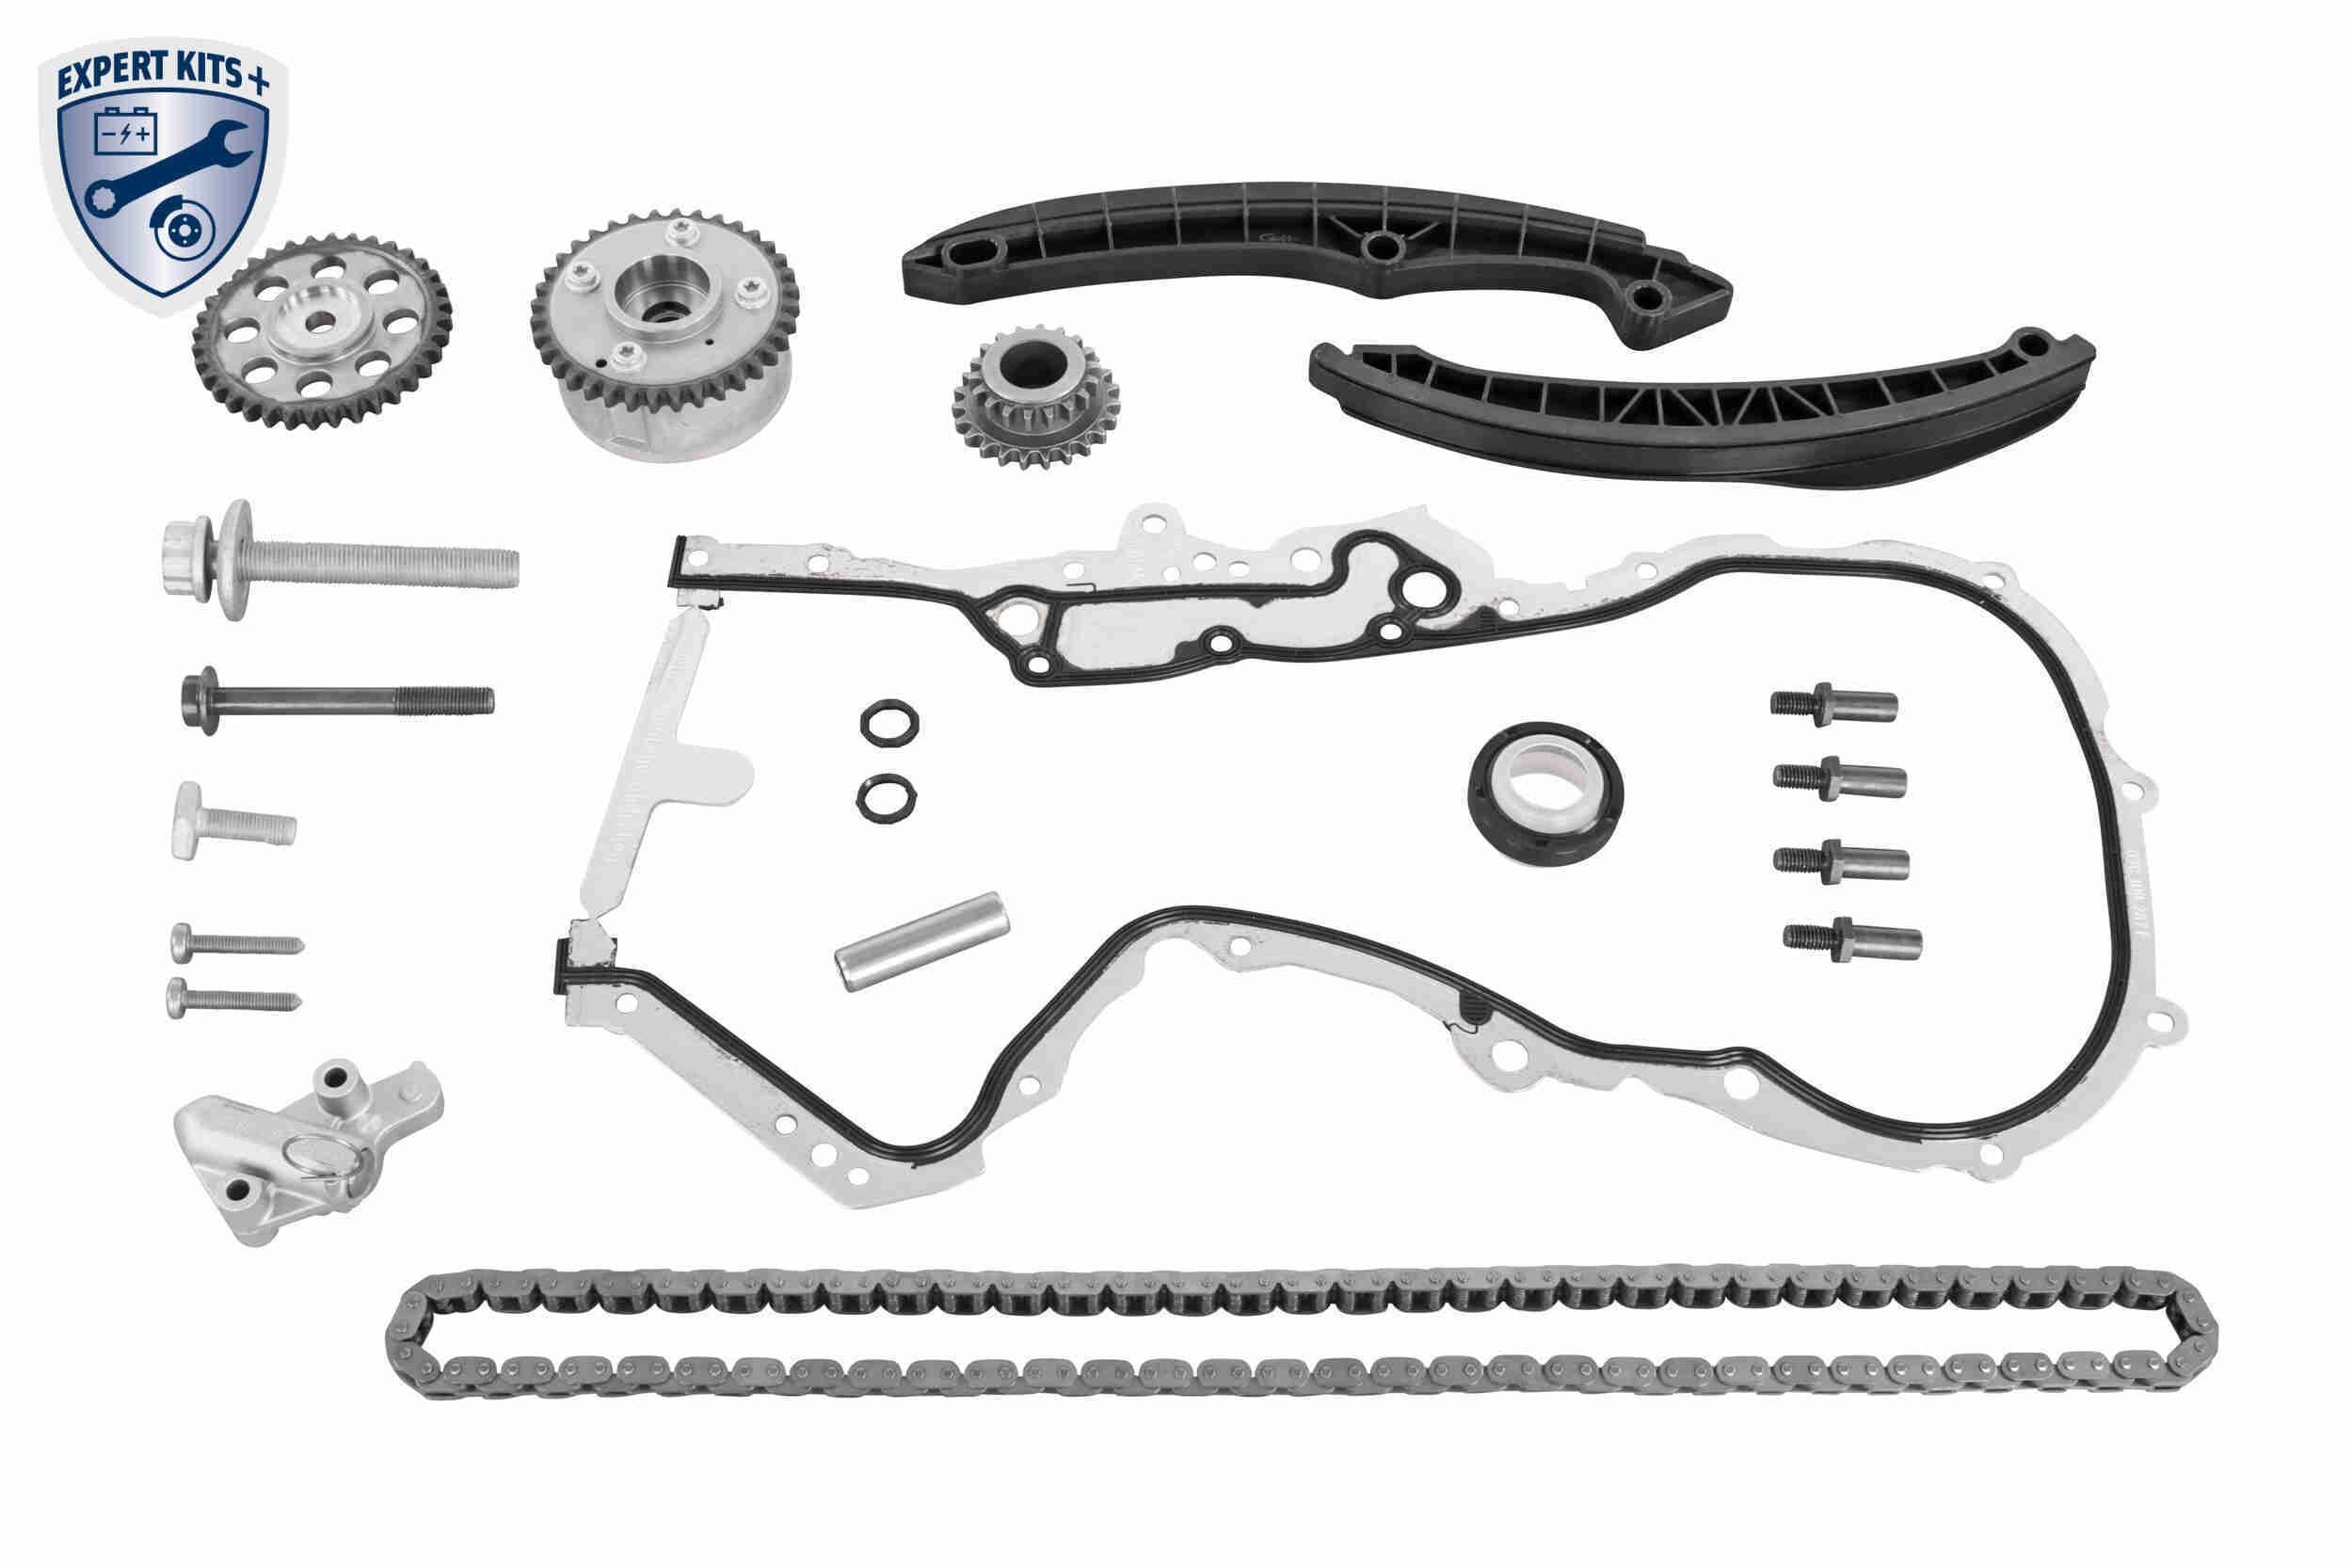 Cam chain kit VAICO with gears, with accessories, with slide rails, with camshaft adjuster, with crankshaft gear, with camshaft gear, with crankshaft seal, with gaskets/seals, with bolts/screws, for camshaft, Closed chain, Silent Chain - V10-10026-SP